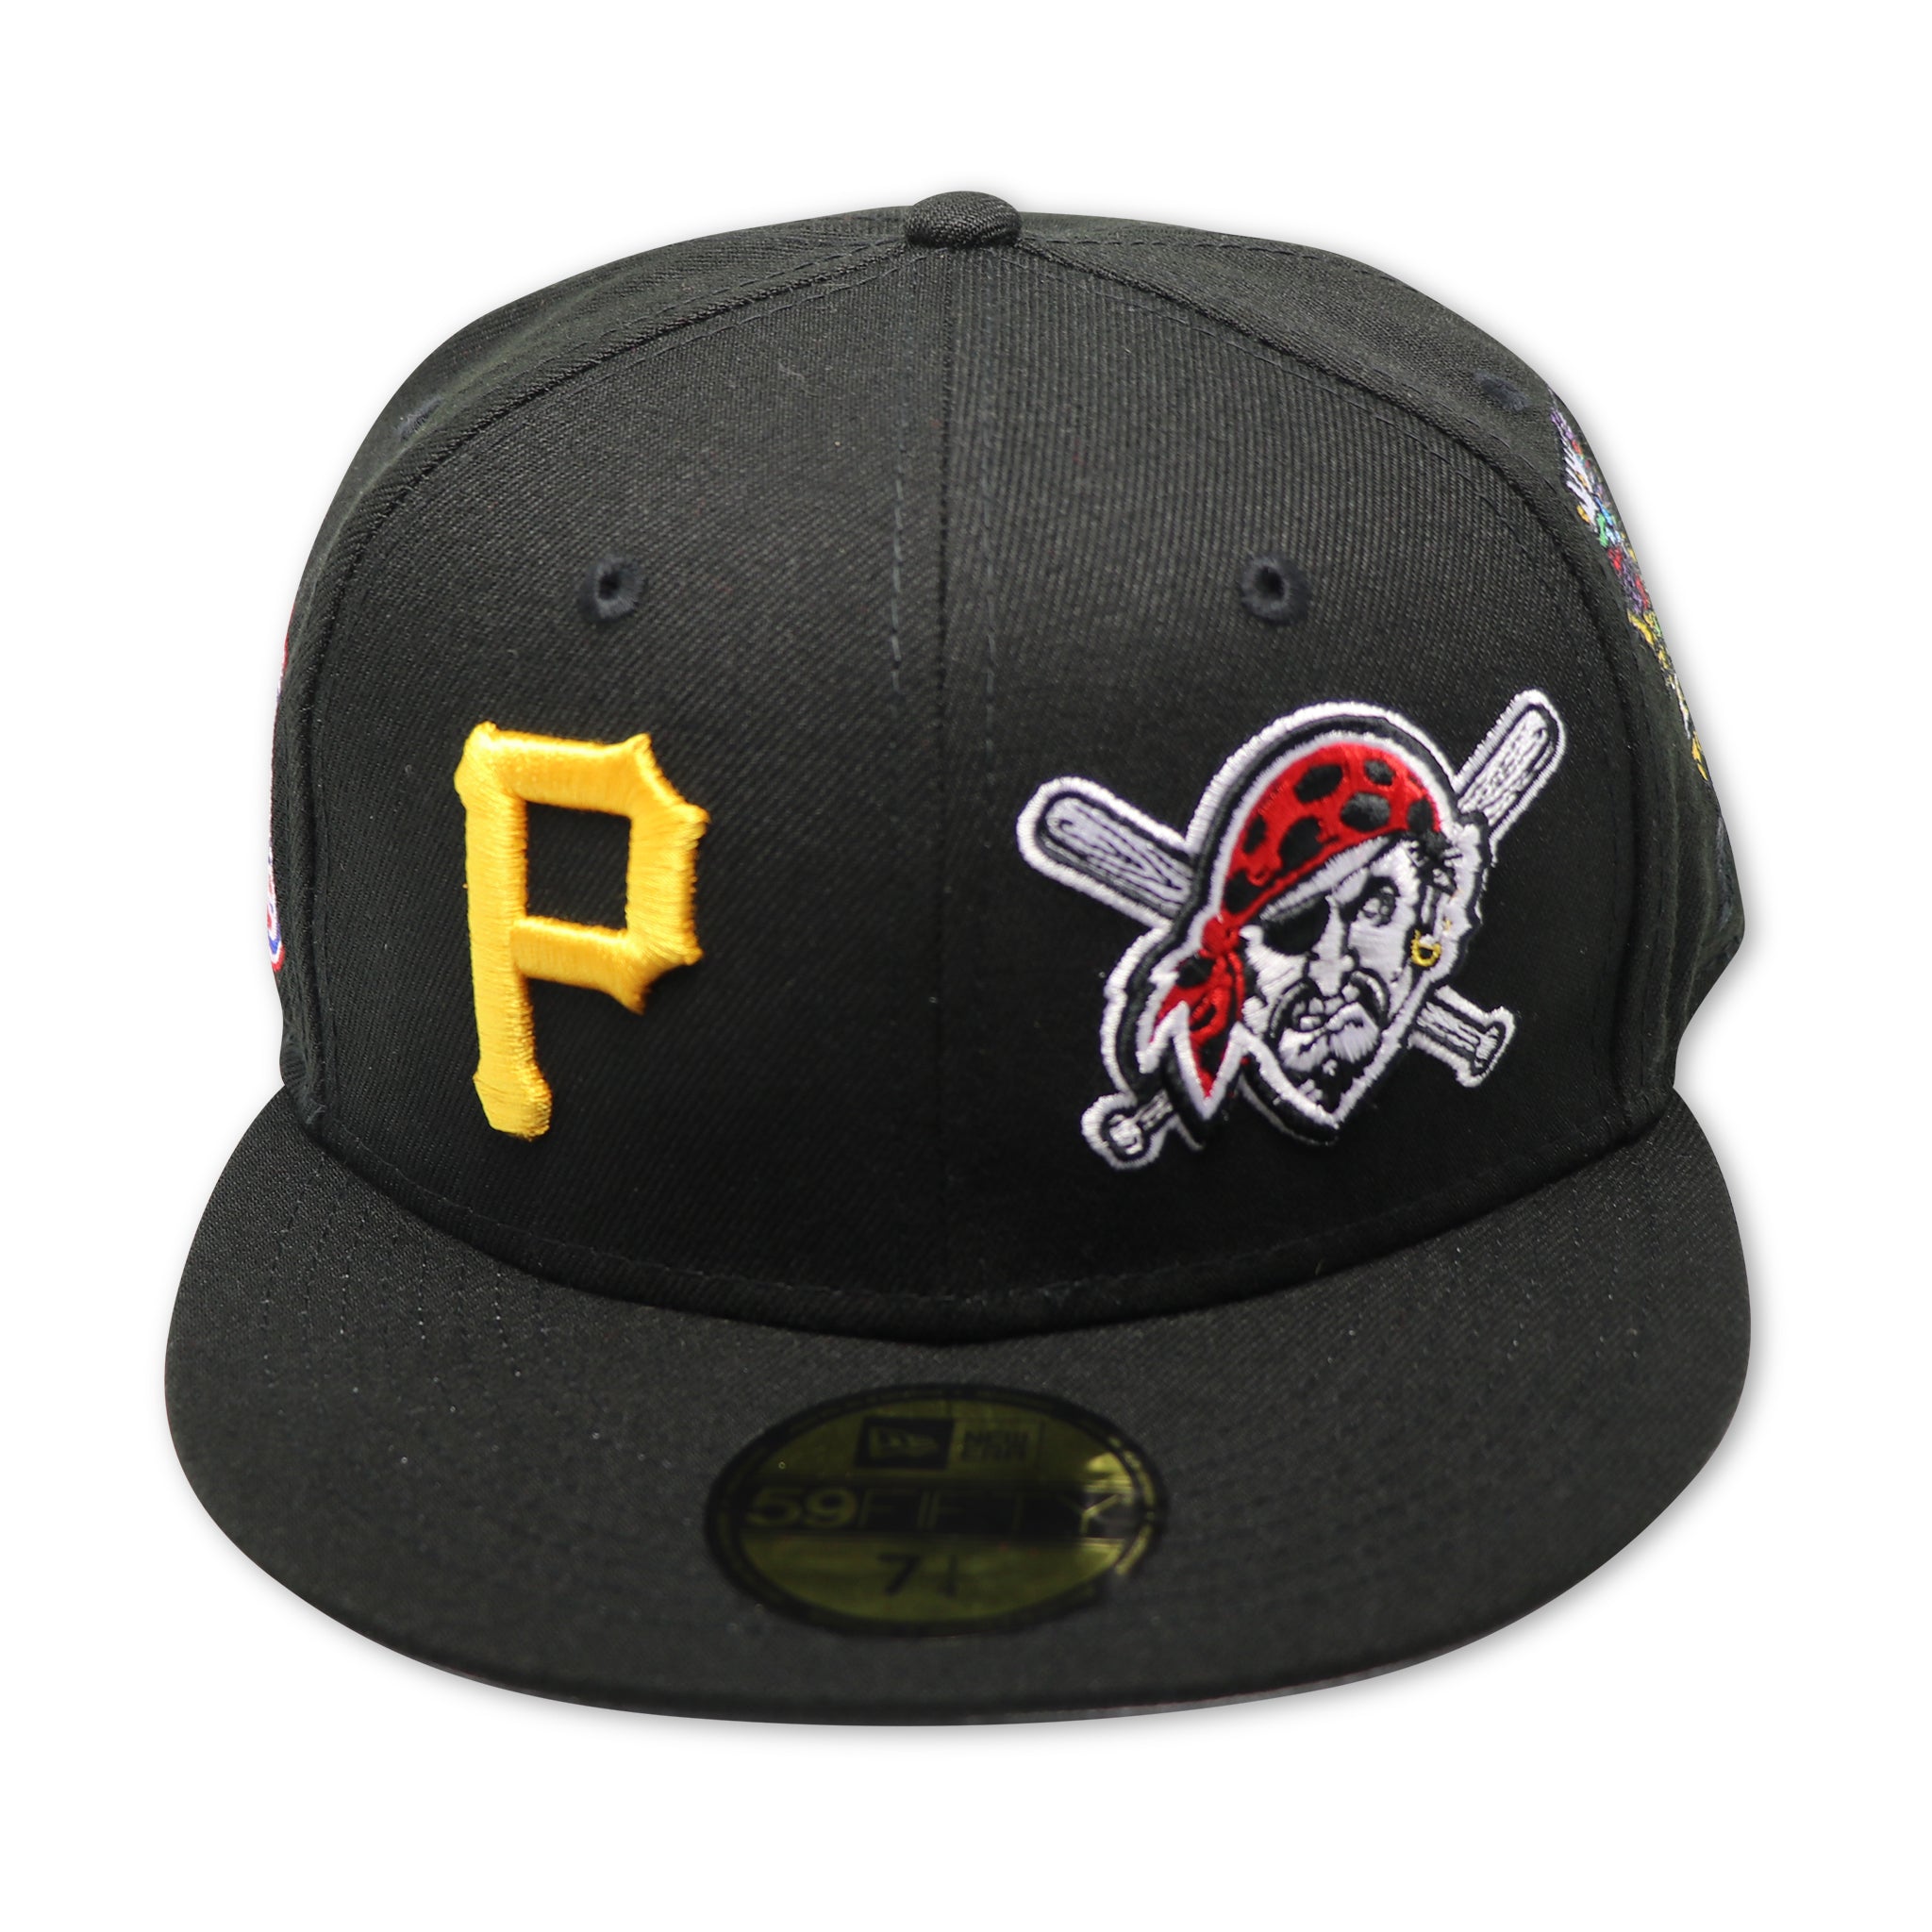 PITTSBURGH PIRATES (PATCH PRIDE) NEWERA 59FIFTY FITTED